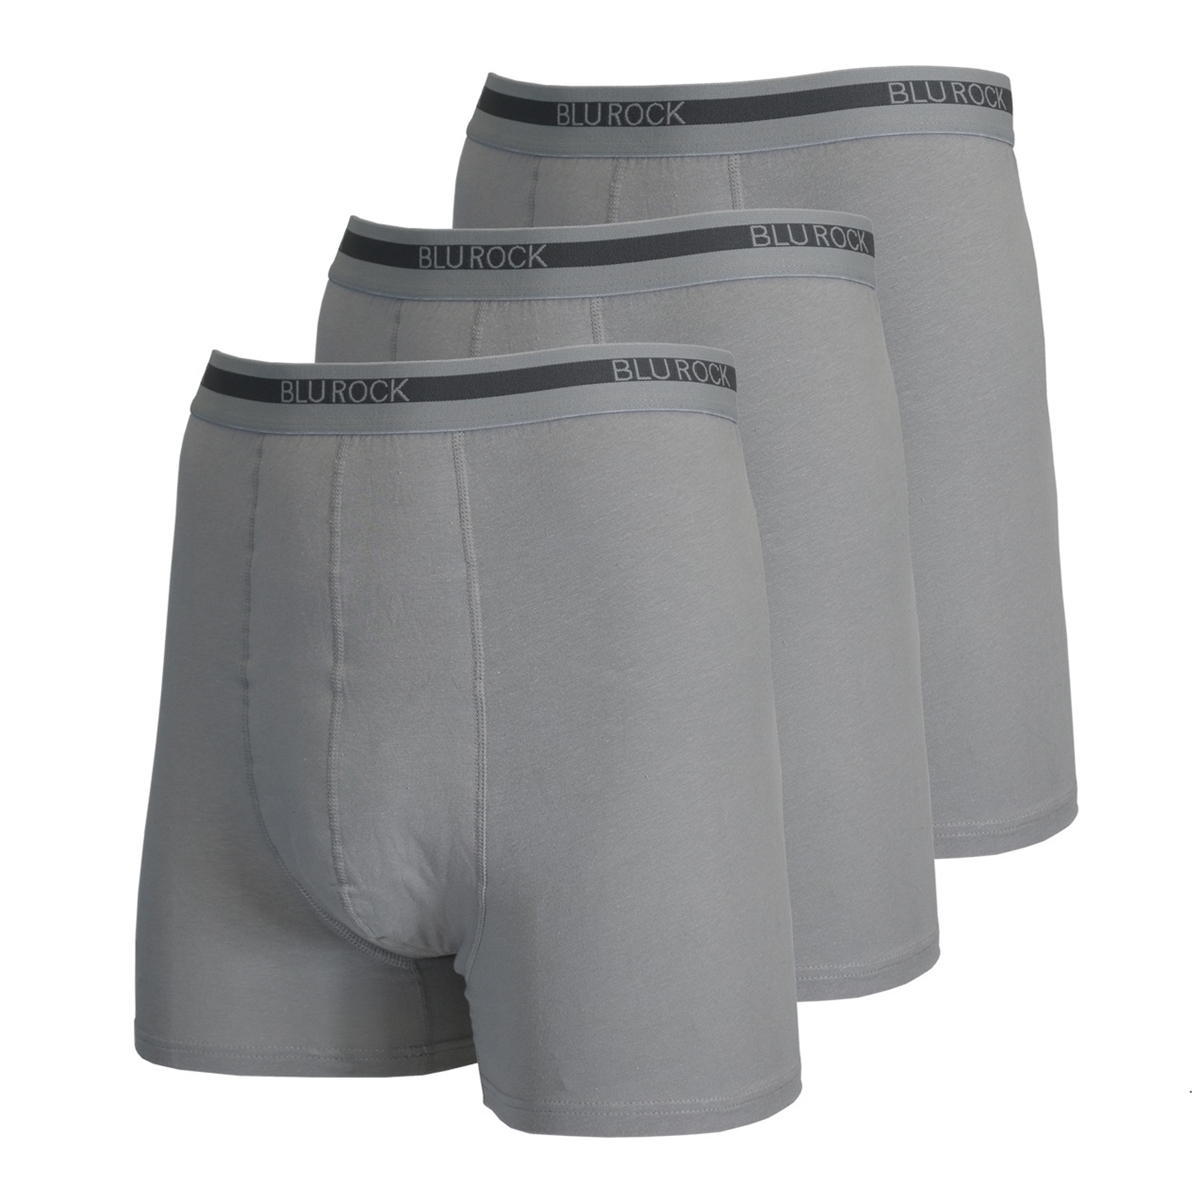 Buy Wholesale 3-Pack Men's Stretch Cotton Boxer Briefs in Grey.